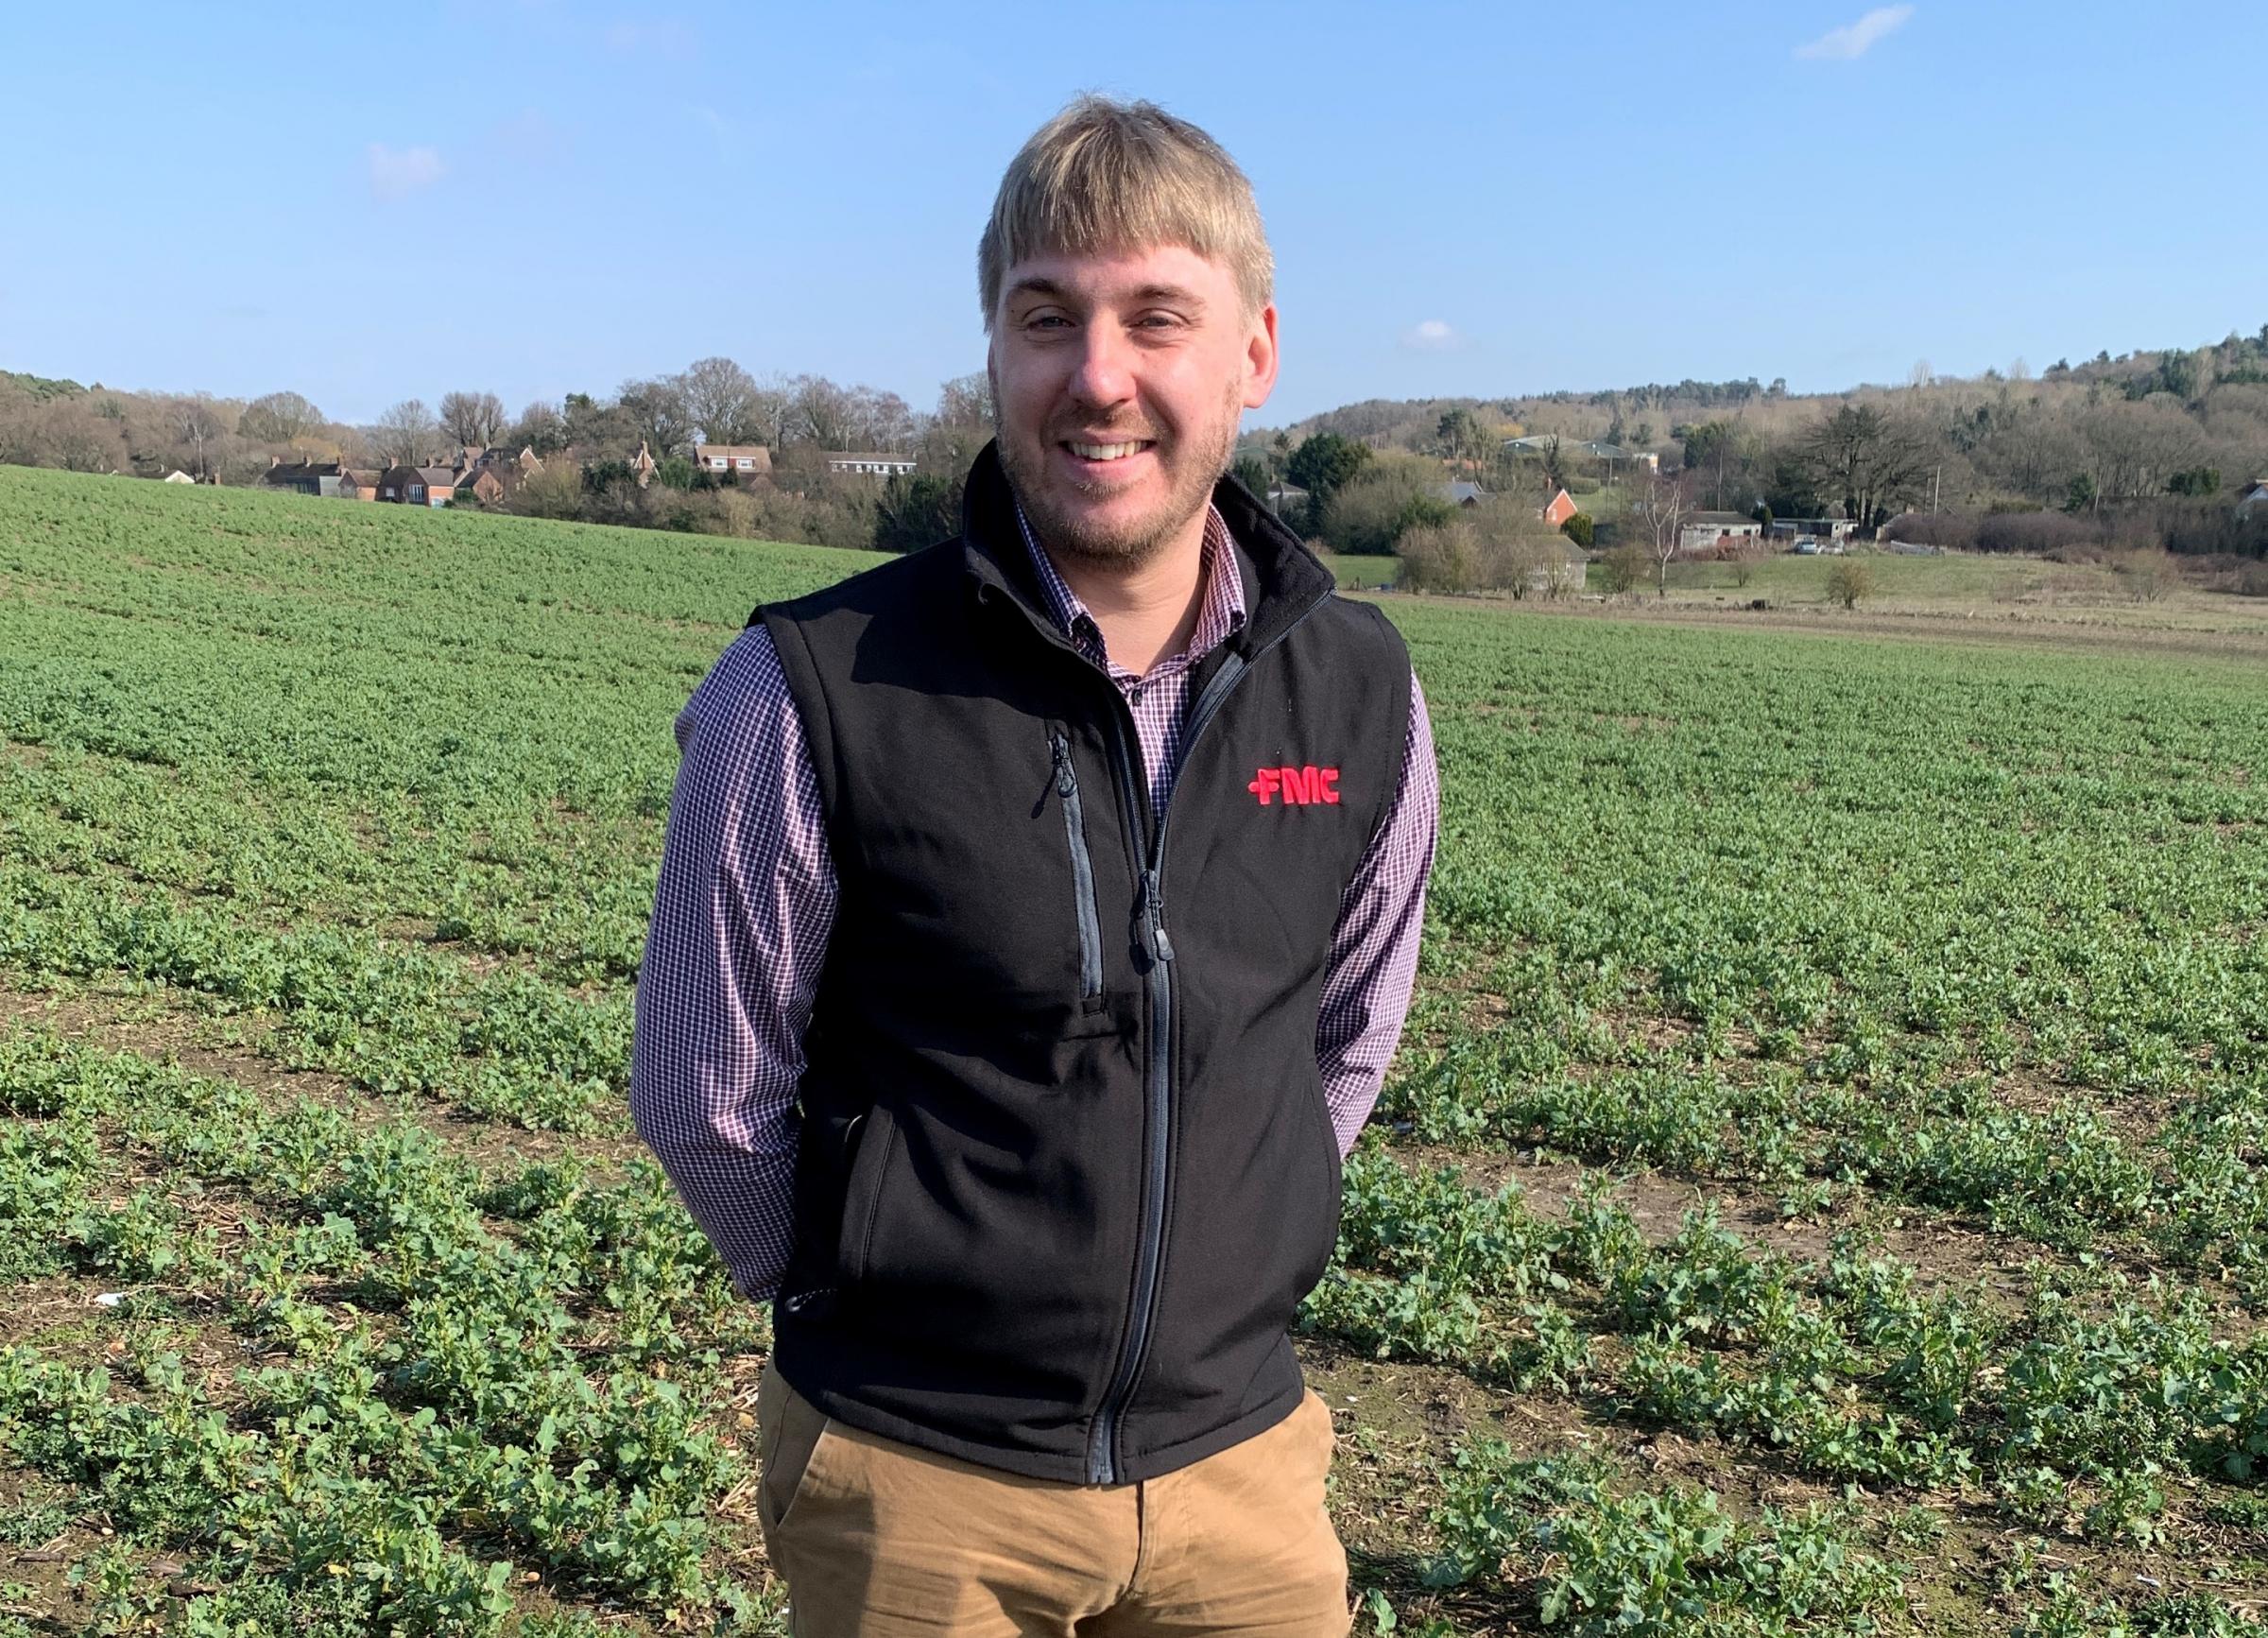 Chris Bond of FMC reckons better targetting of nutrients at tuber bulking can pay off for growers